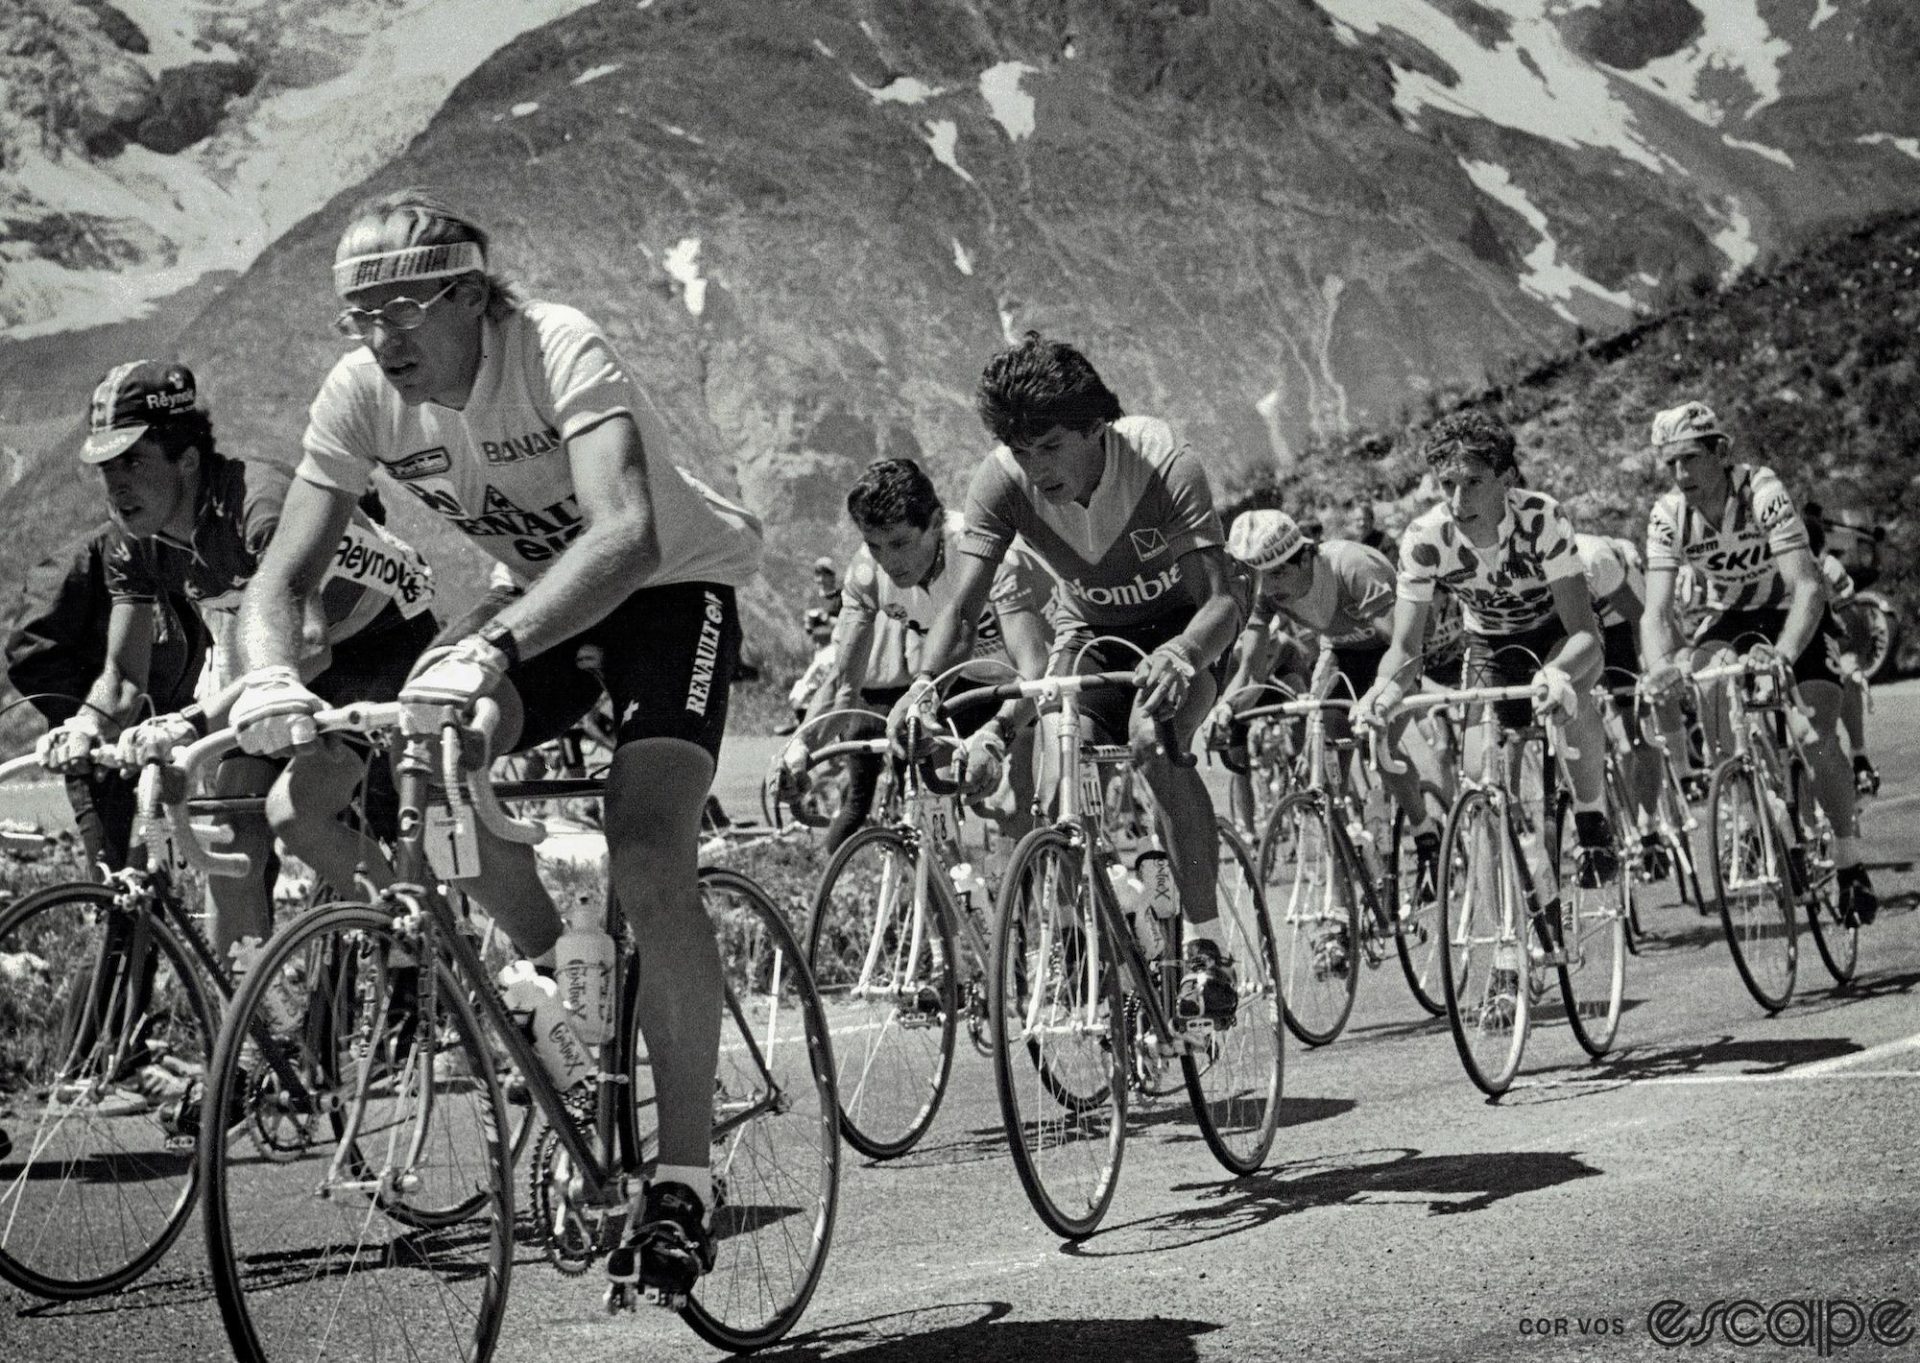 Laurent Fignon, in the yellow jersey, leads riders up a mountain pass in the 1984 Tour de France. He has his trademark headband on and his small, round eyeglasses.